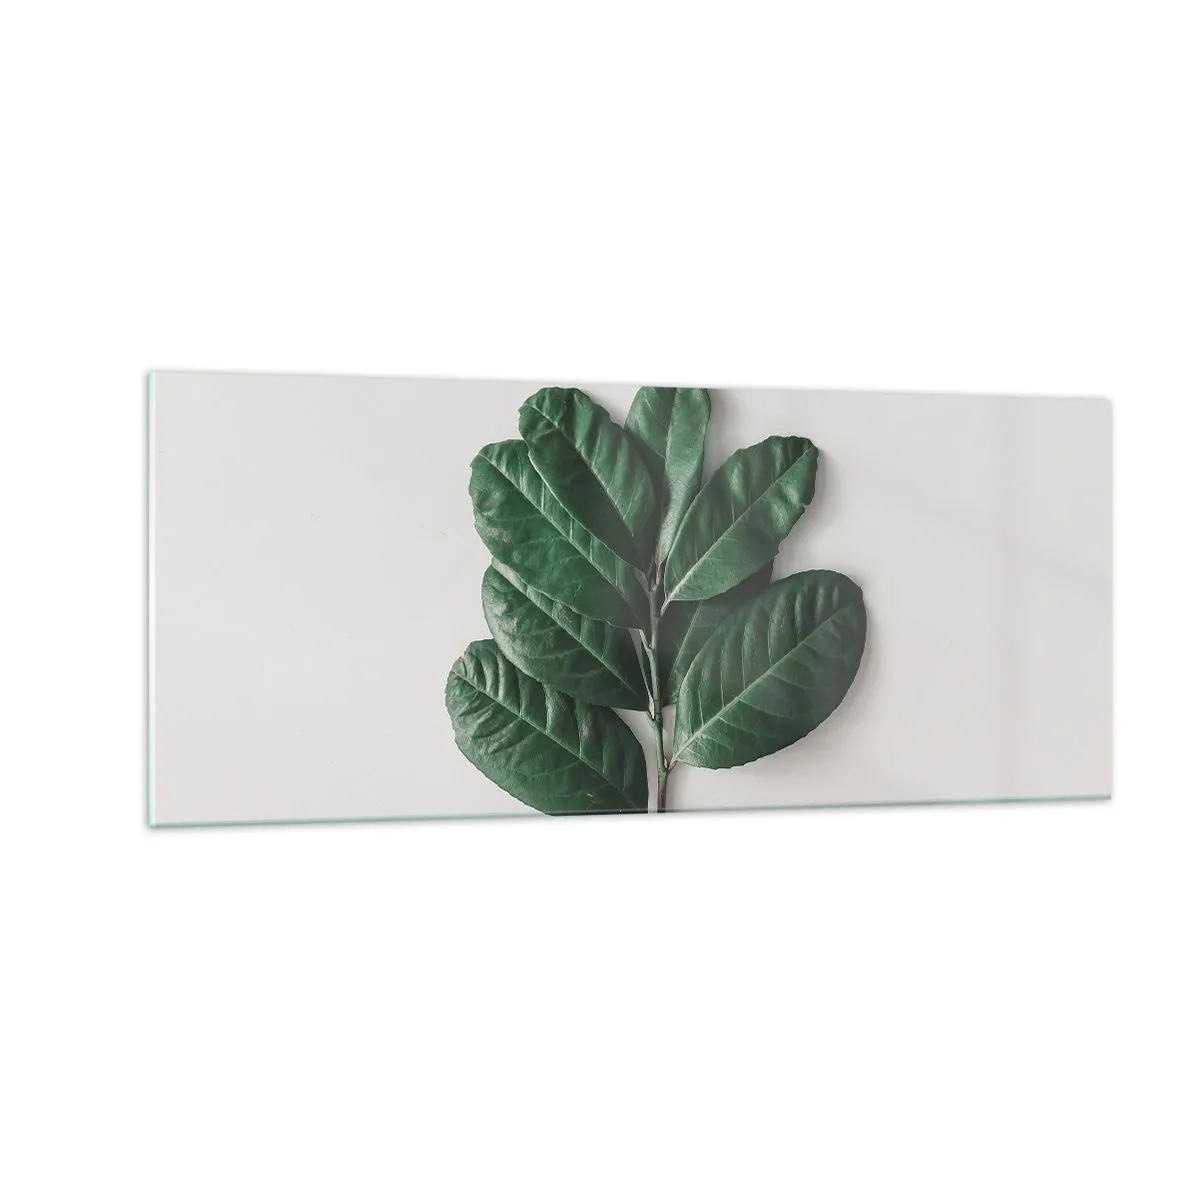 Glass picture  Arttor 100x40 cm - Drawing of Nature Itself - Leaves, Plant, Nature, Green Leaf, Botany, For living-room, For bedroom, White, Green, Horizontal, Glass, GAB100x40-4956